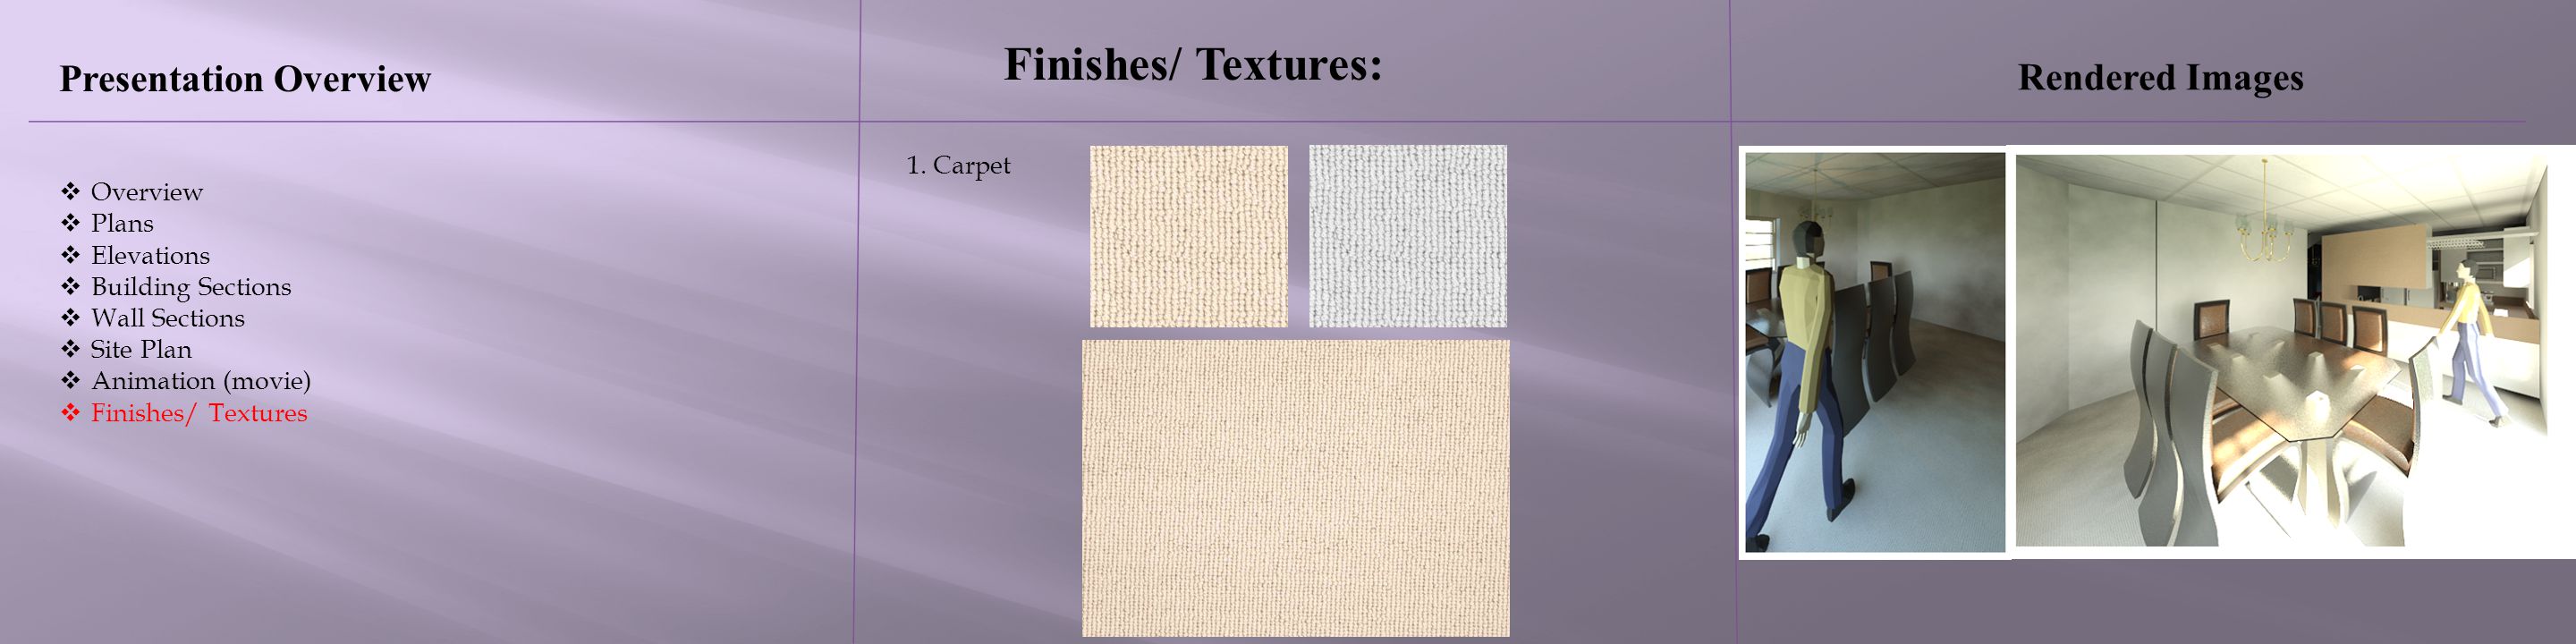 Finishes/ Textures: Presentation Overview Rendered Images 1. Carpet